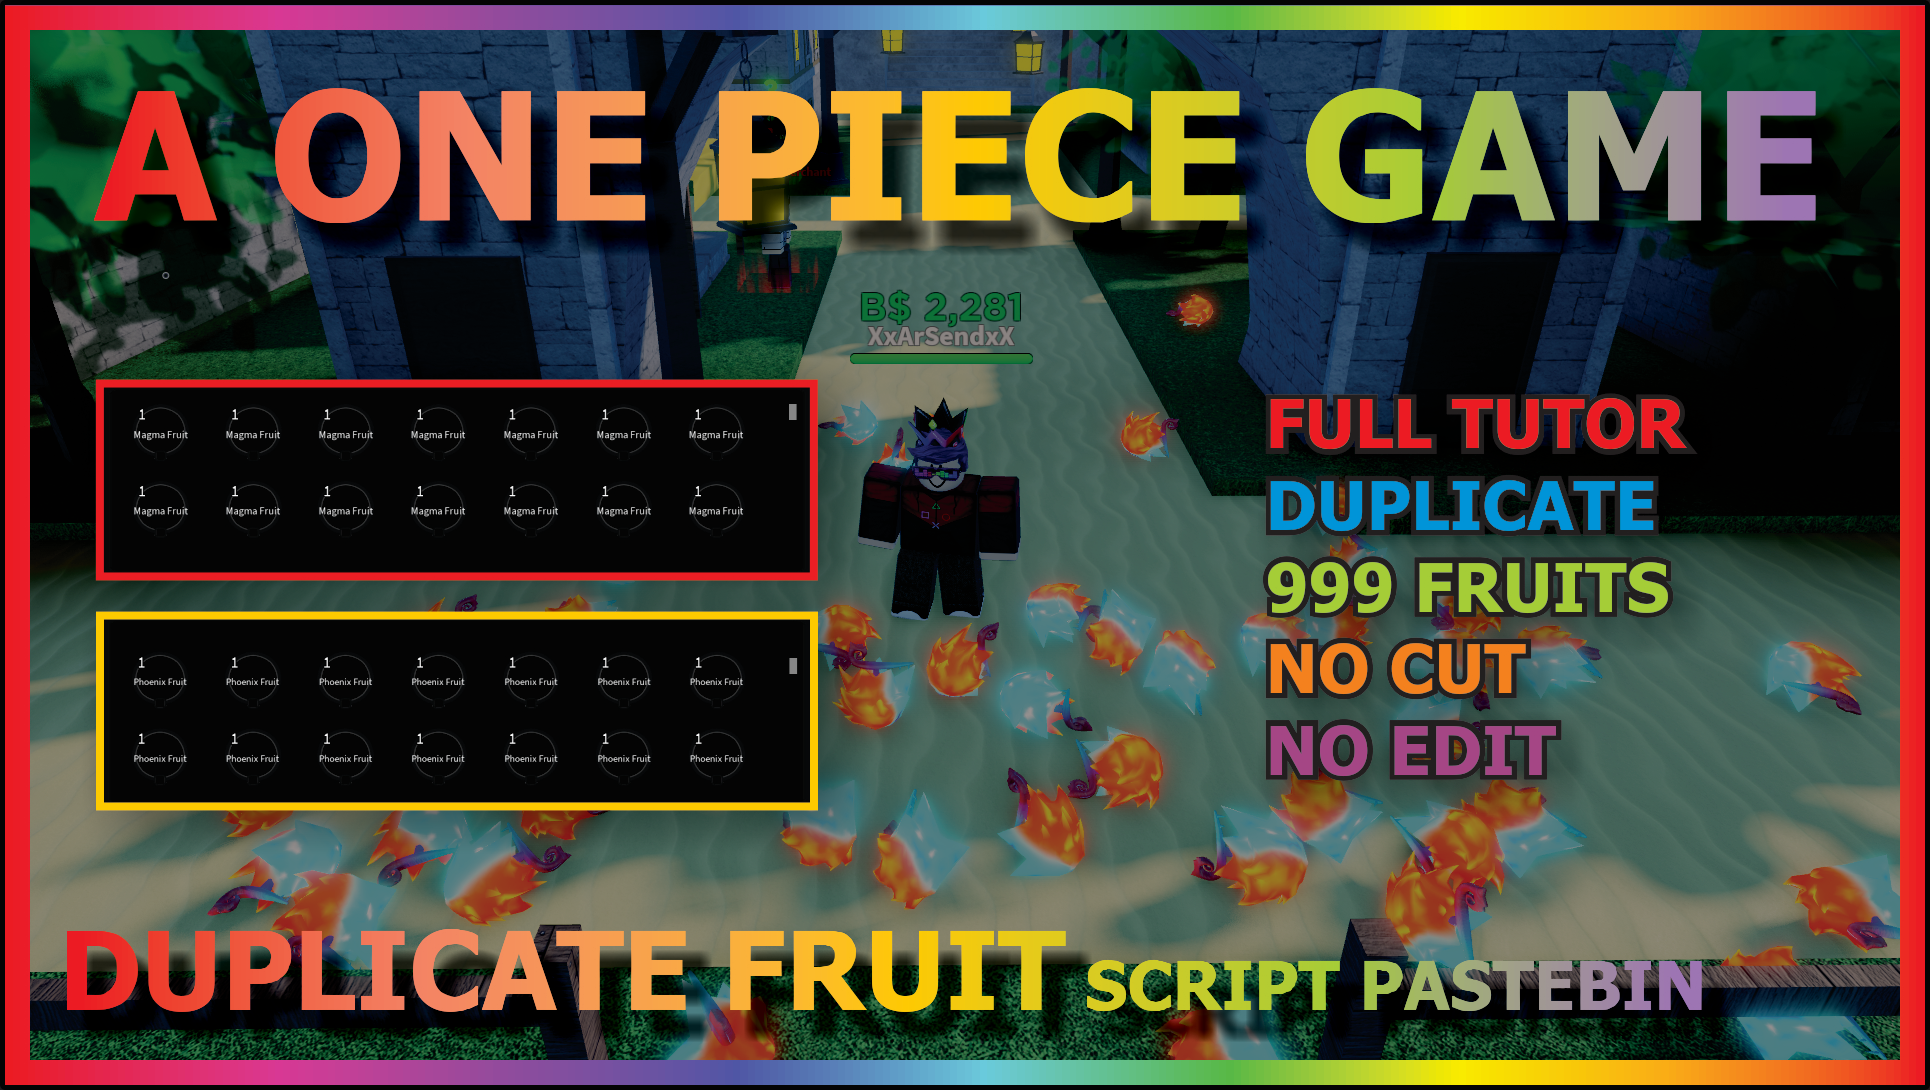 CODE!] Magma Fruit Showcase in A One Piece Game ( Code in